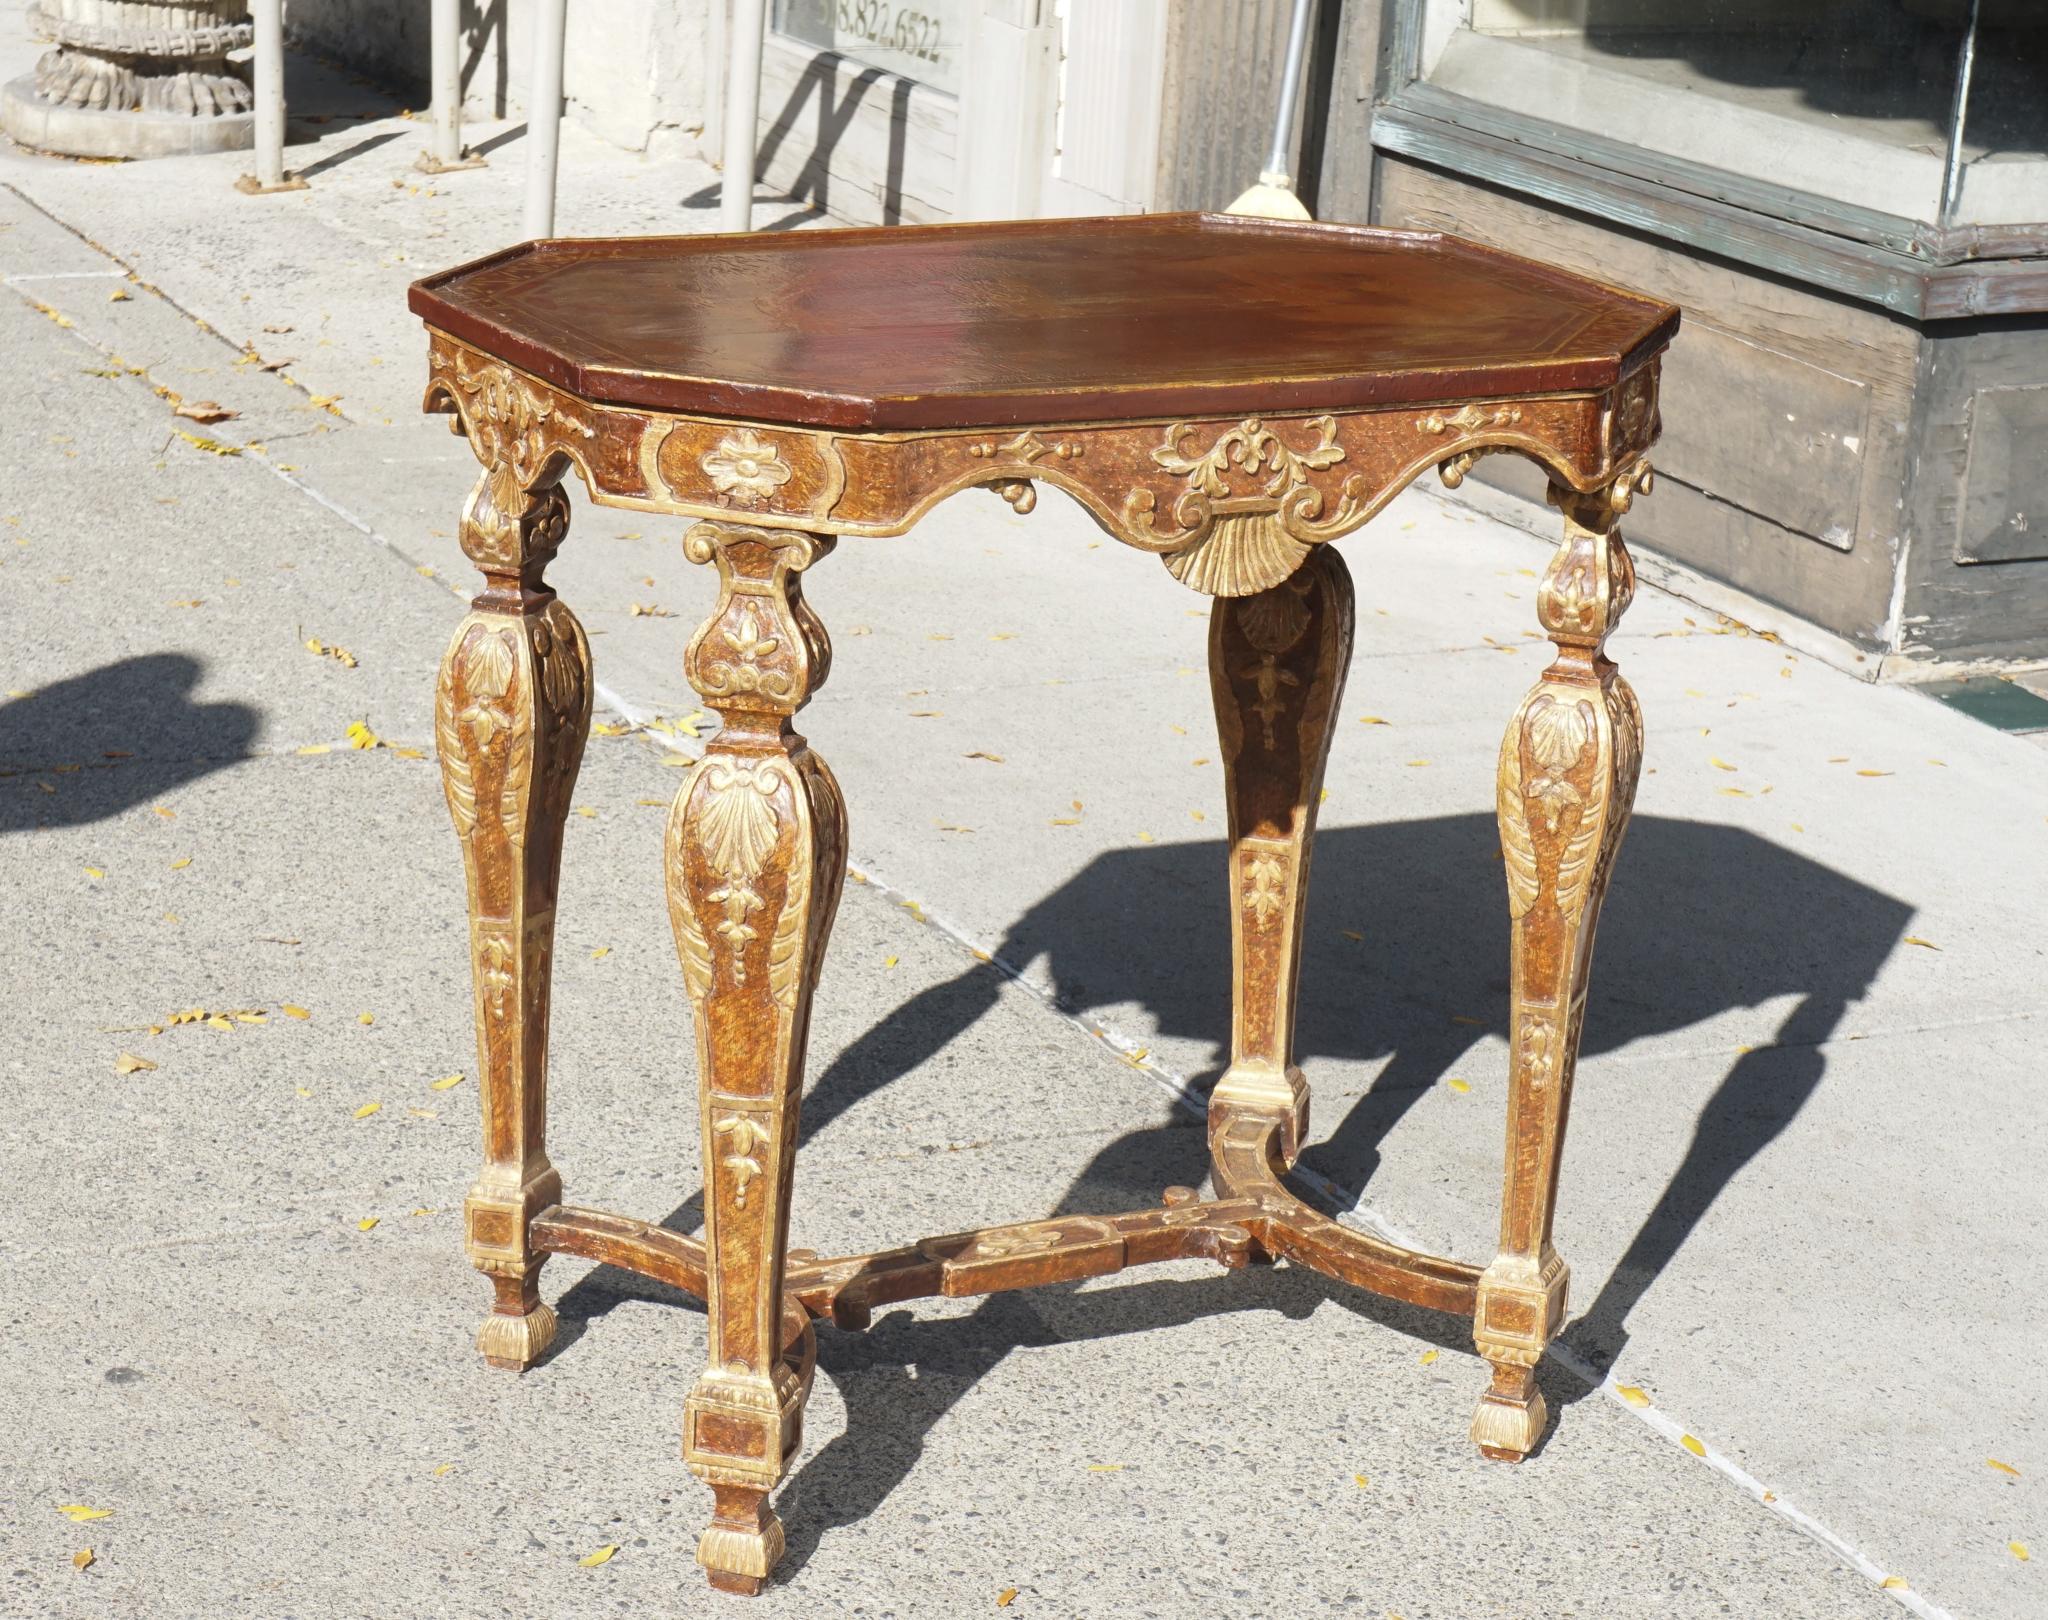 Carved Period Baroque Painted and Gilt Italian Table From the Estate of Cynthia Phipps For Sale